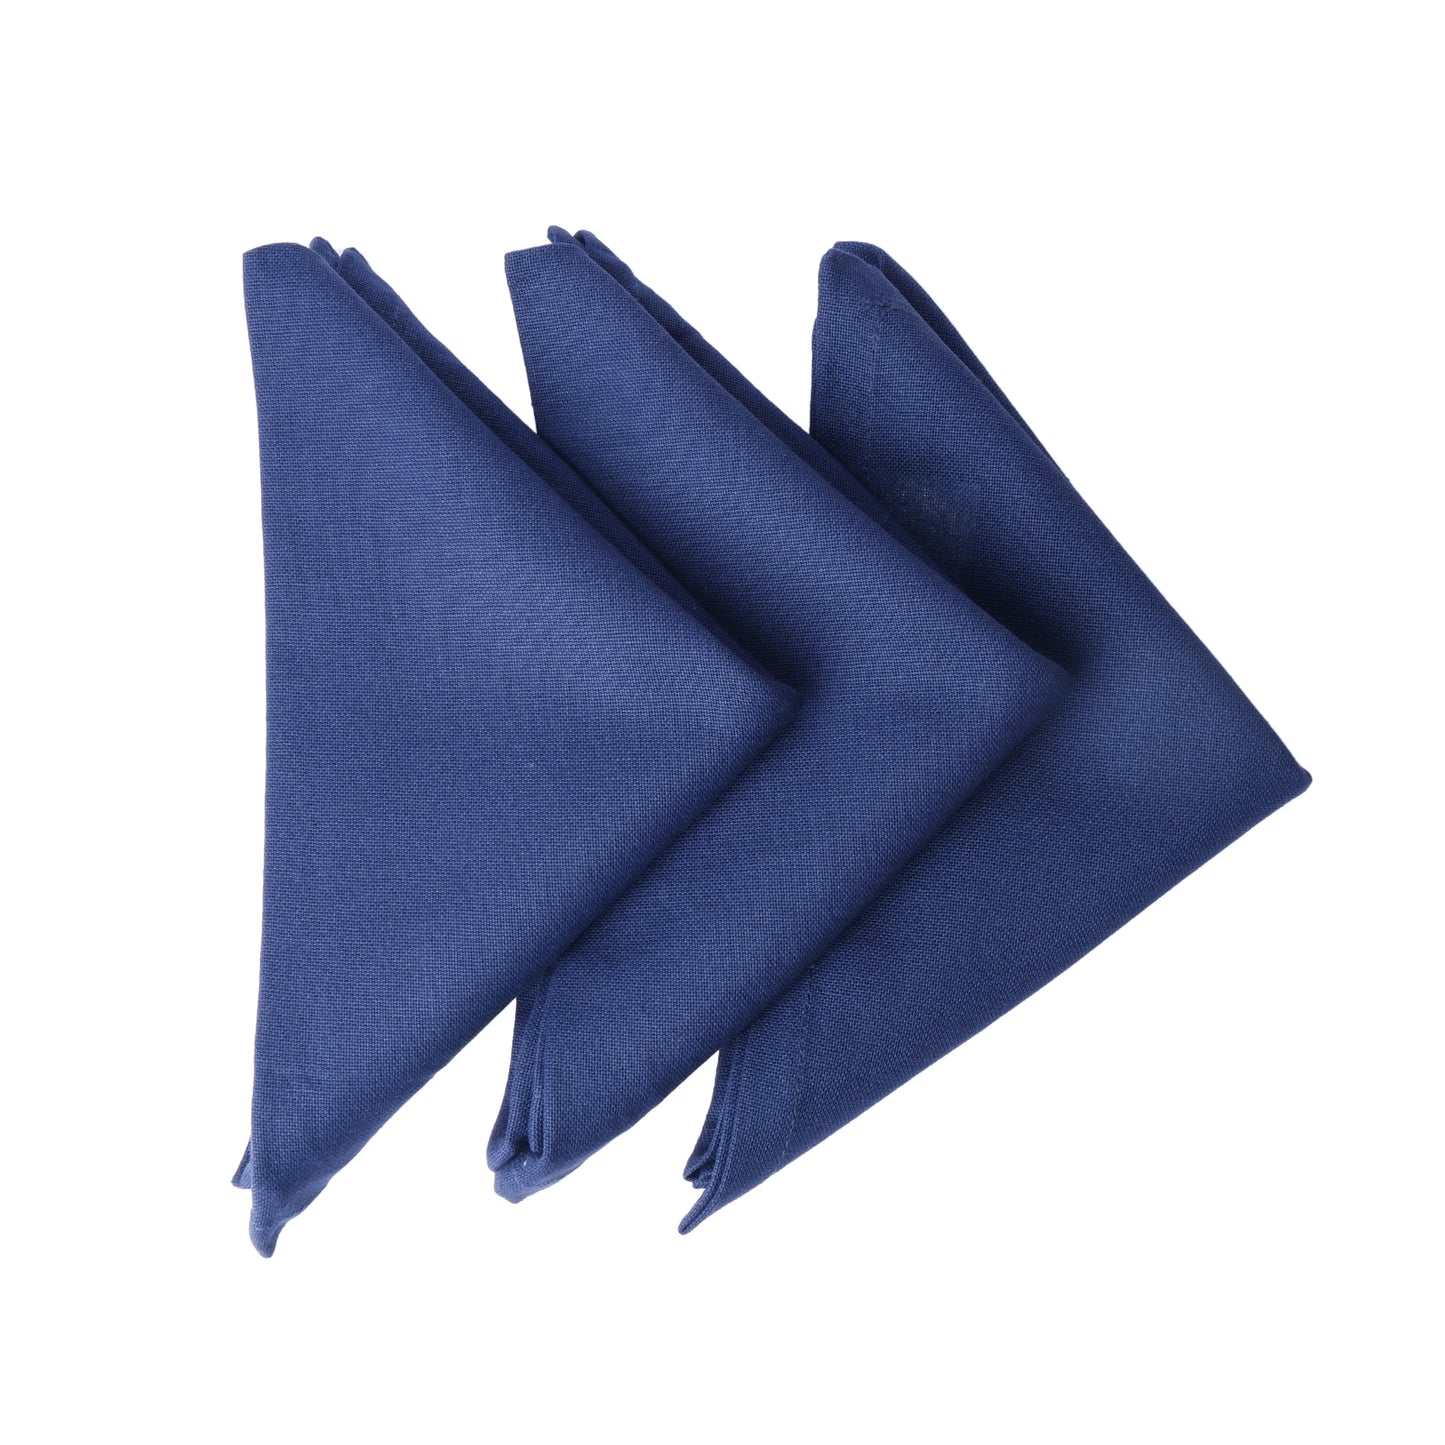 100% Everyday Use Cotton Cloth Dinner Napkins Set Of 12-Solid Navy Blue 18 X 18 Inche